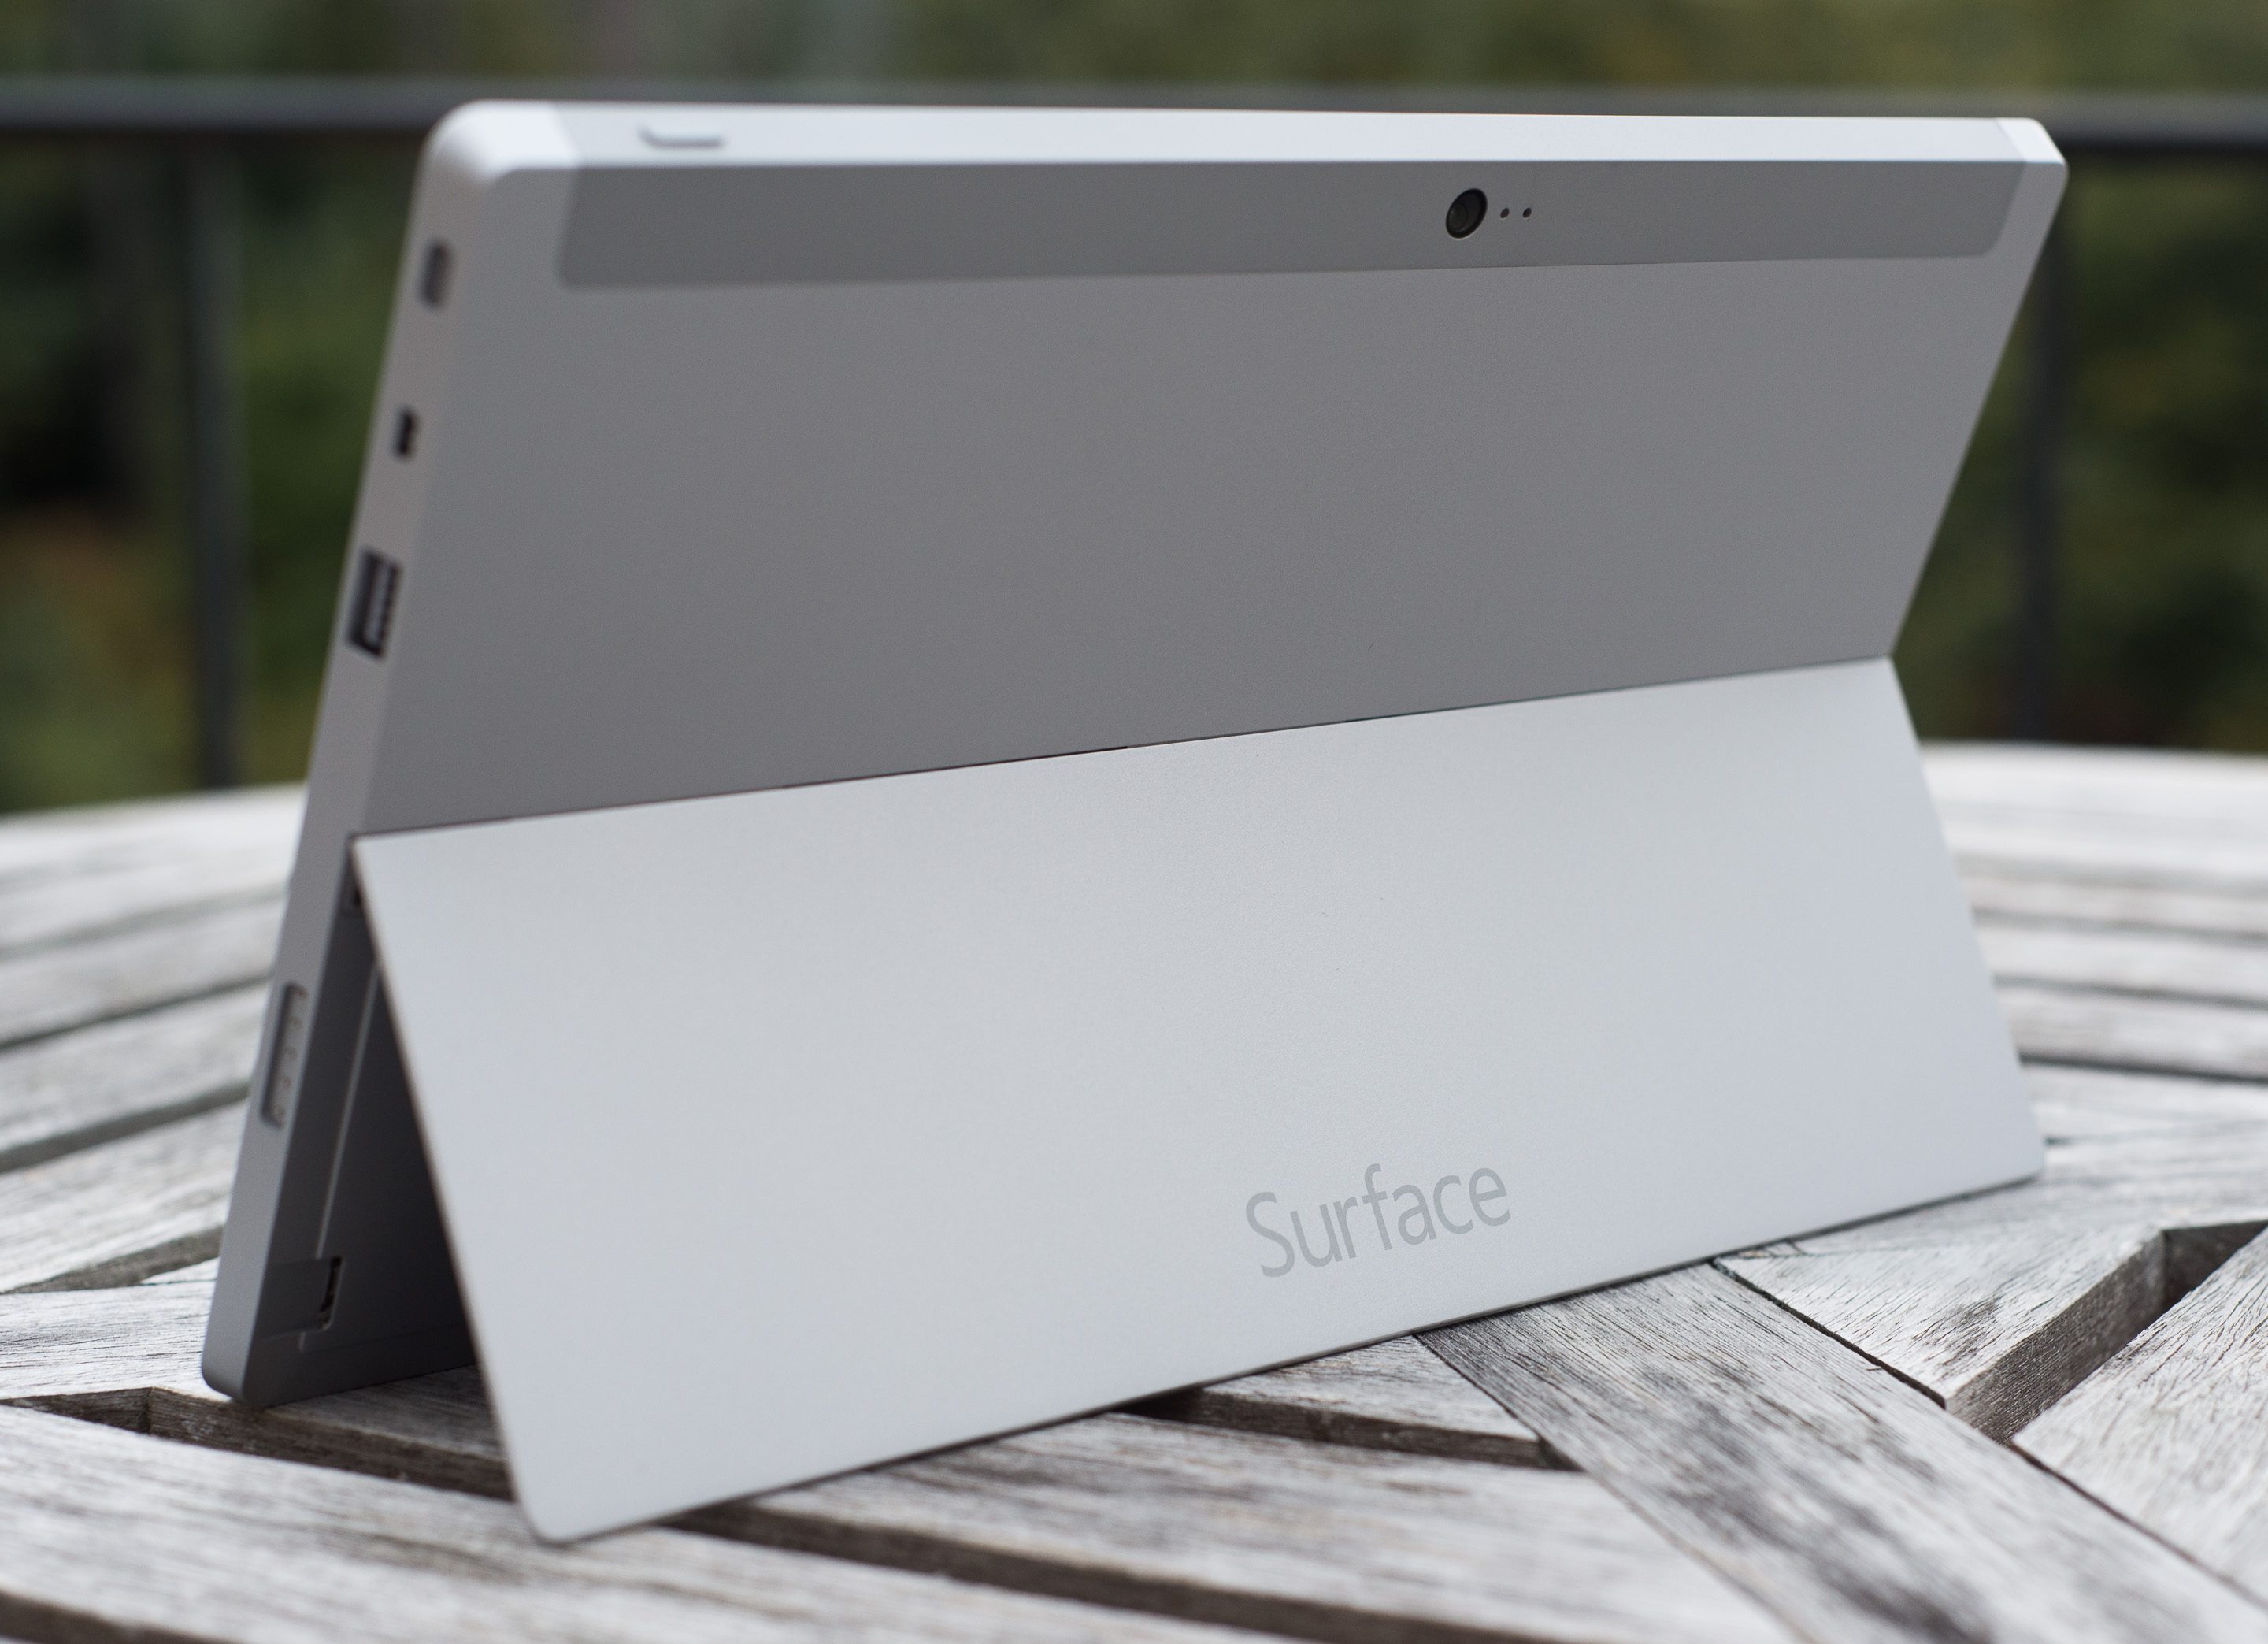 SURFACE2